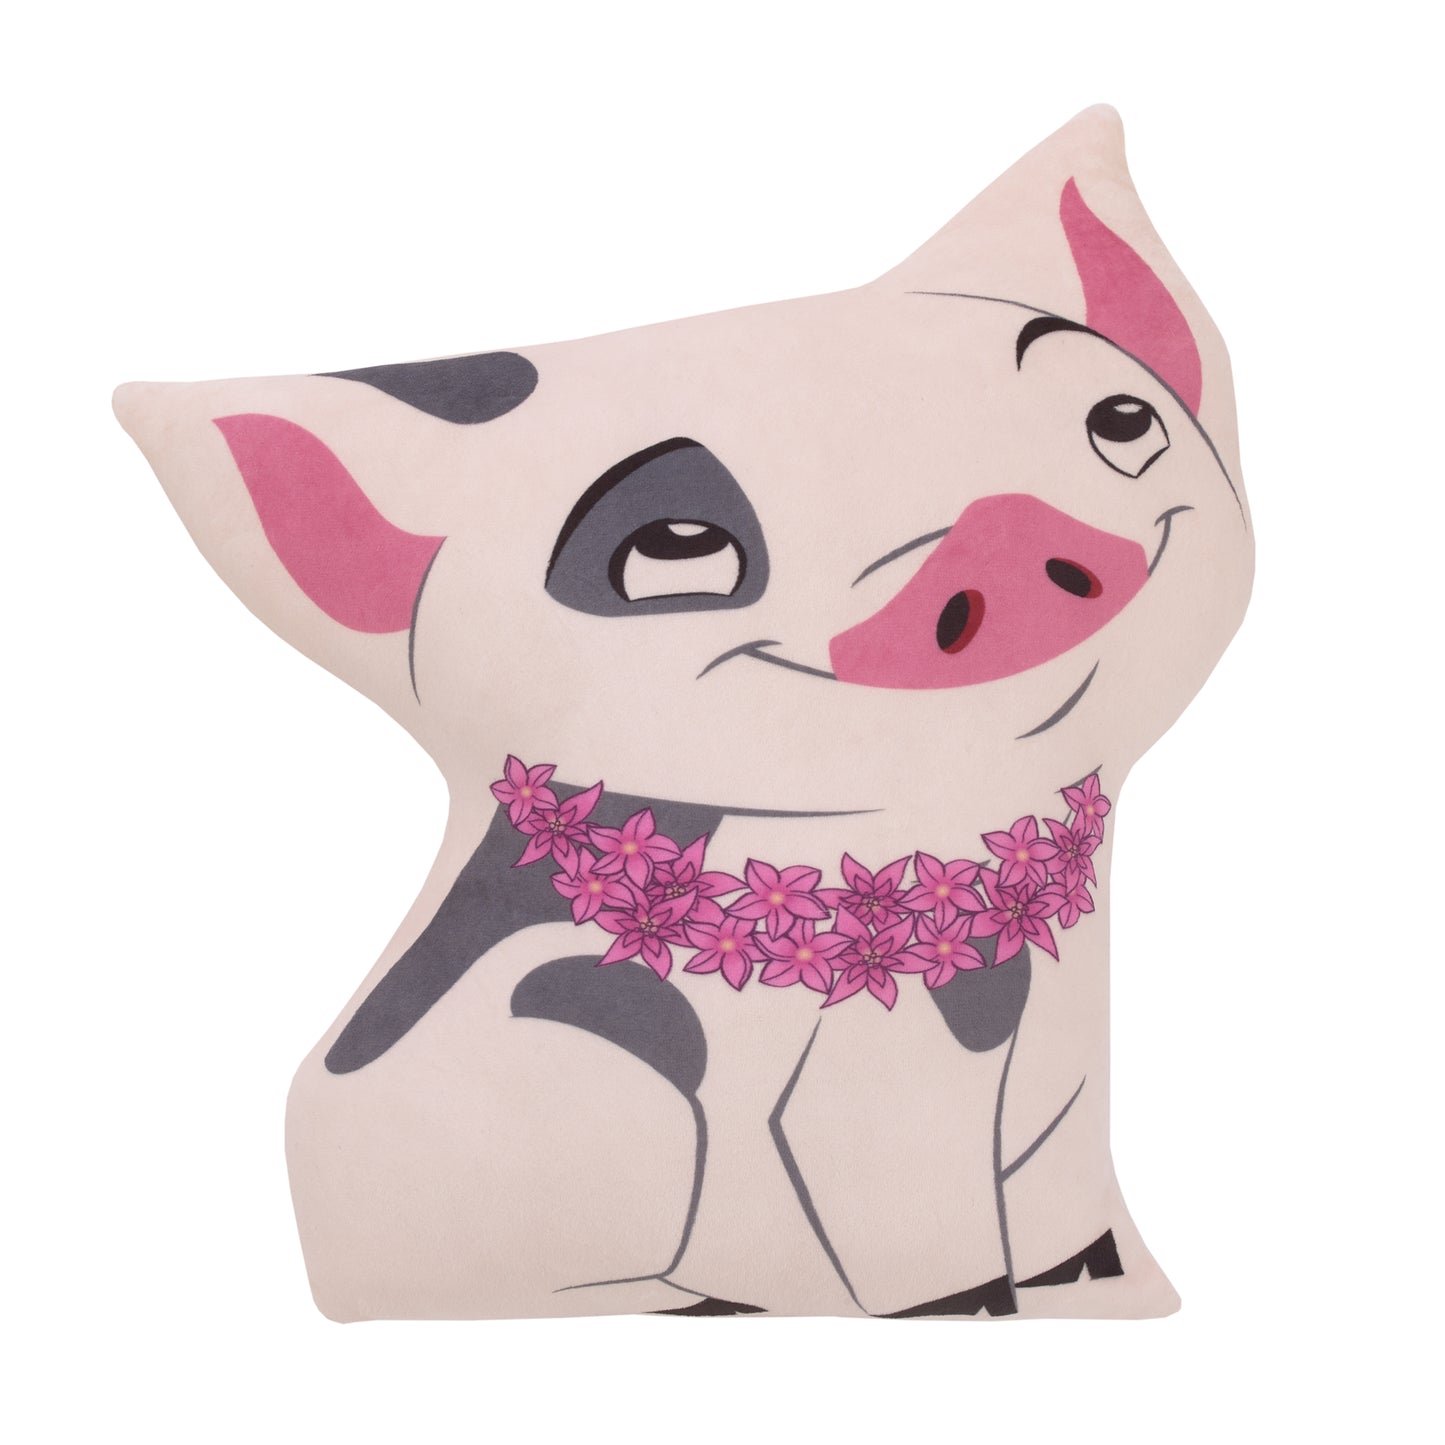 Disney Moana Free as the Ocean Pua The Pig Shaped Squishy Toddler Pillow